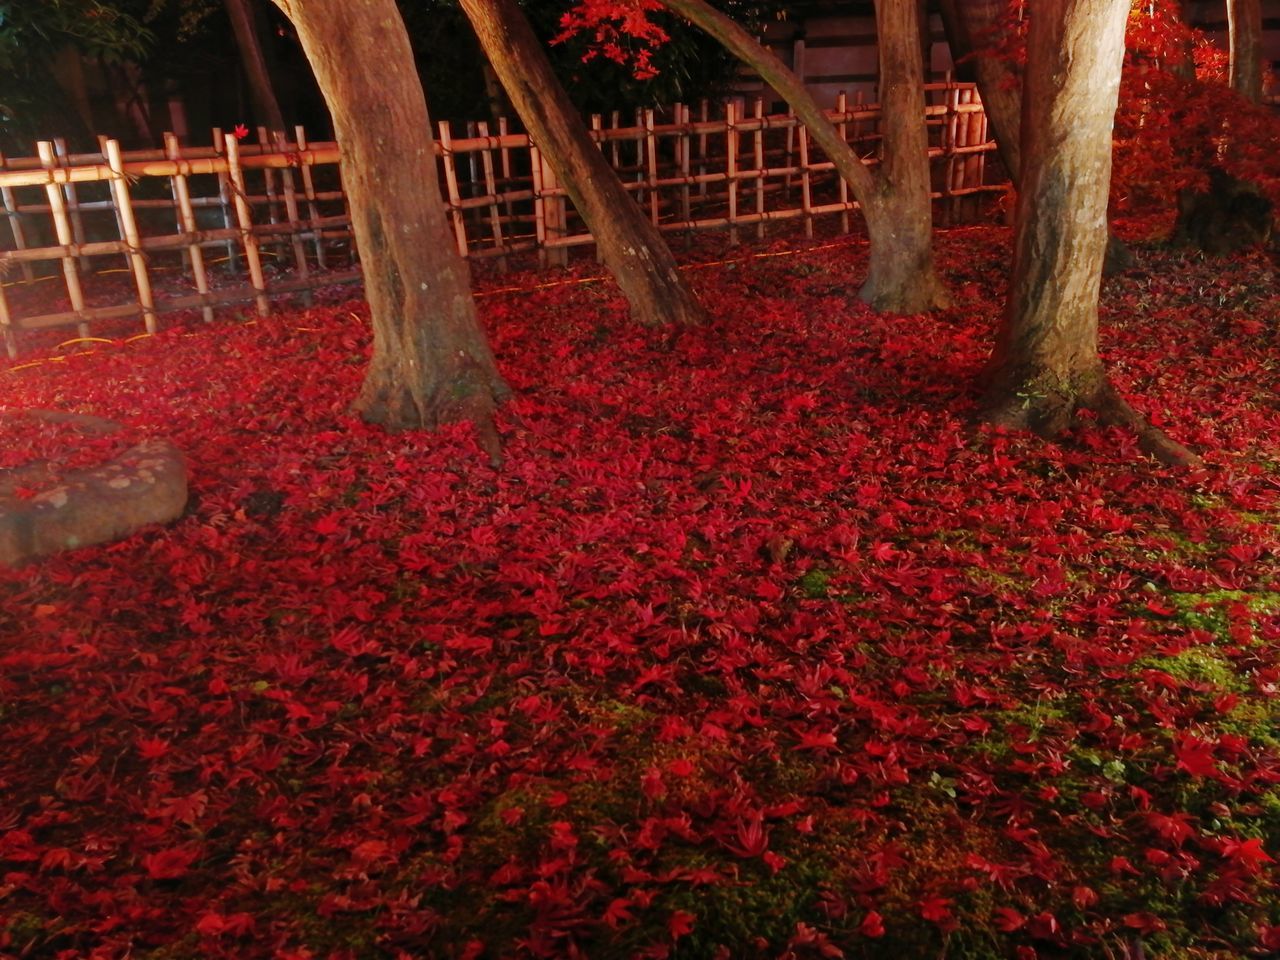 RED FLOWERING PLANTS AND TREES IN PARK